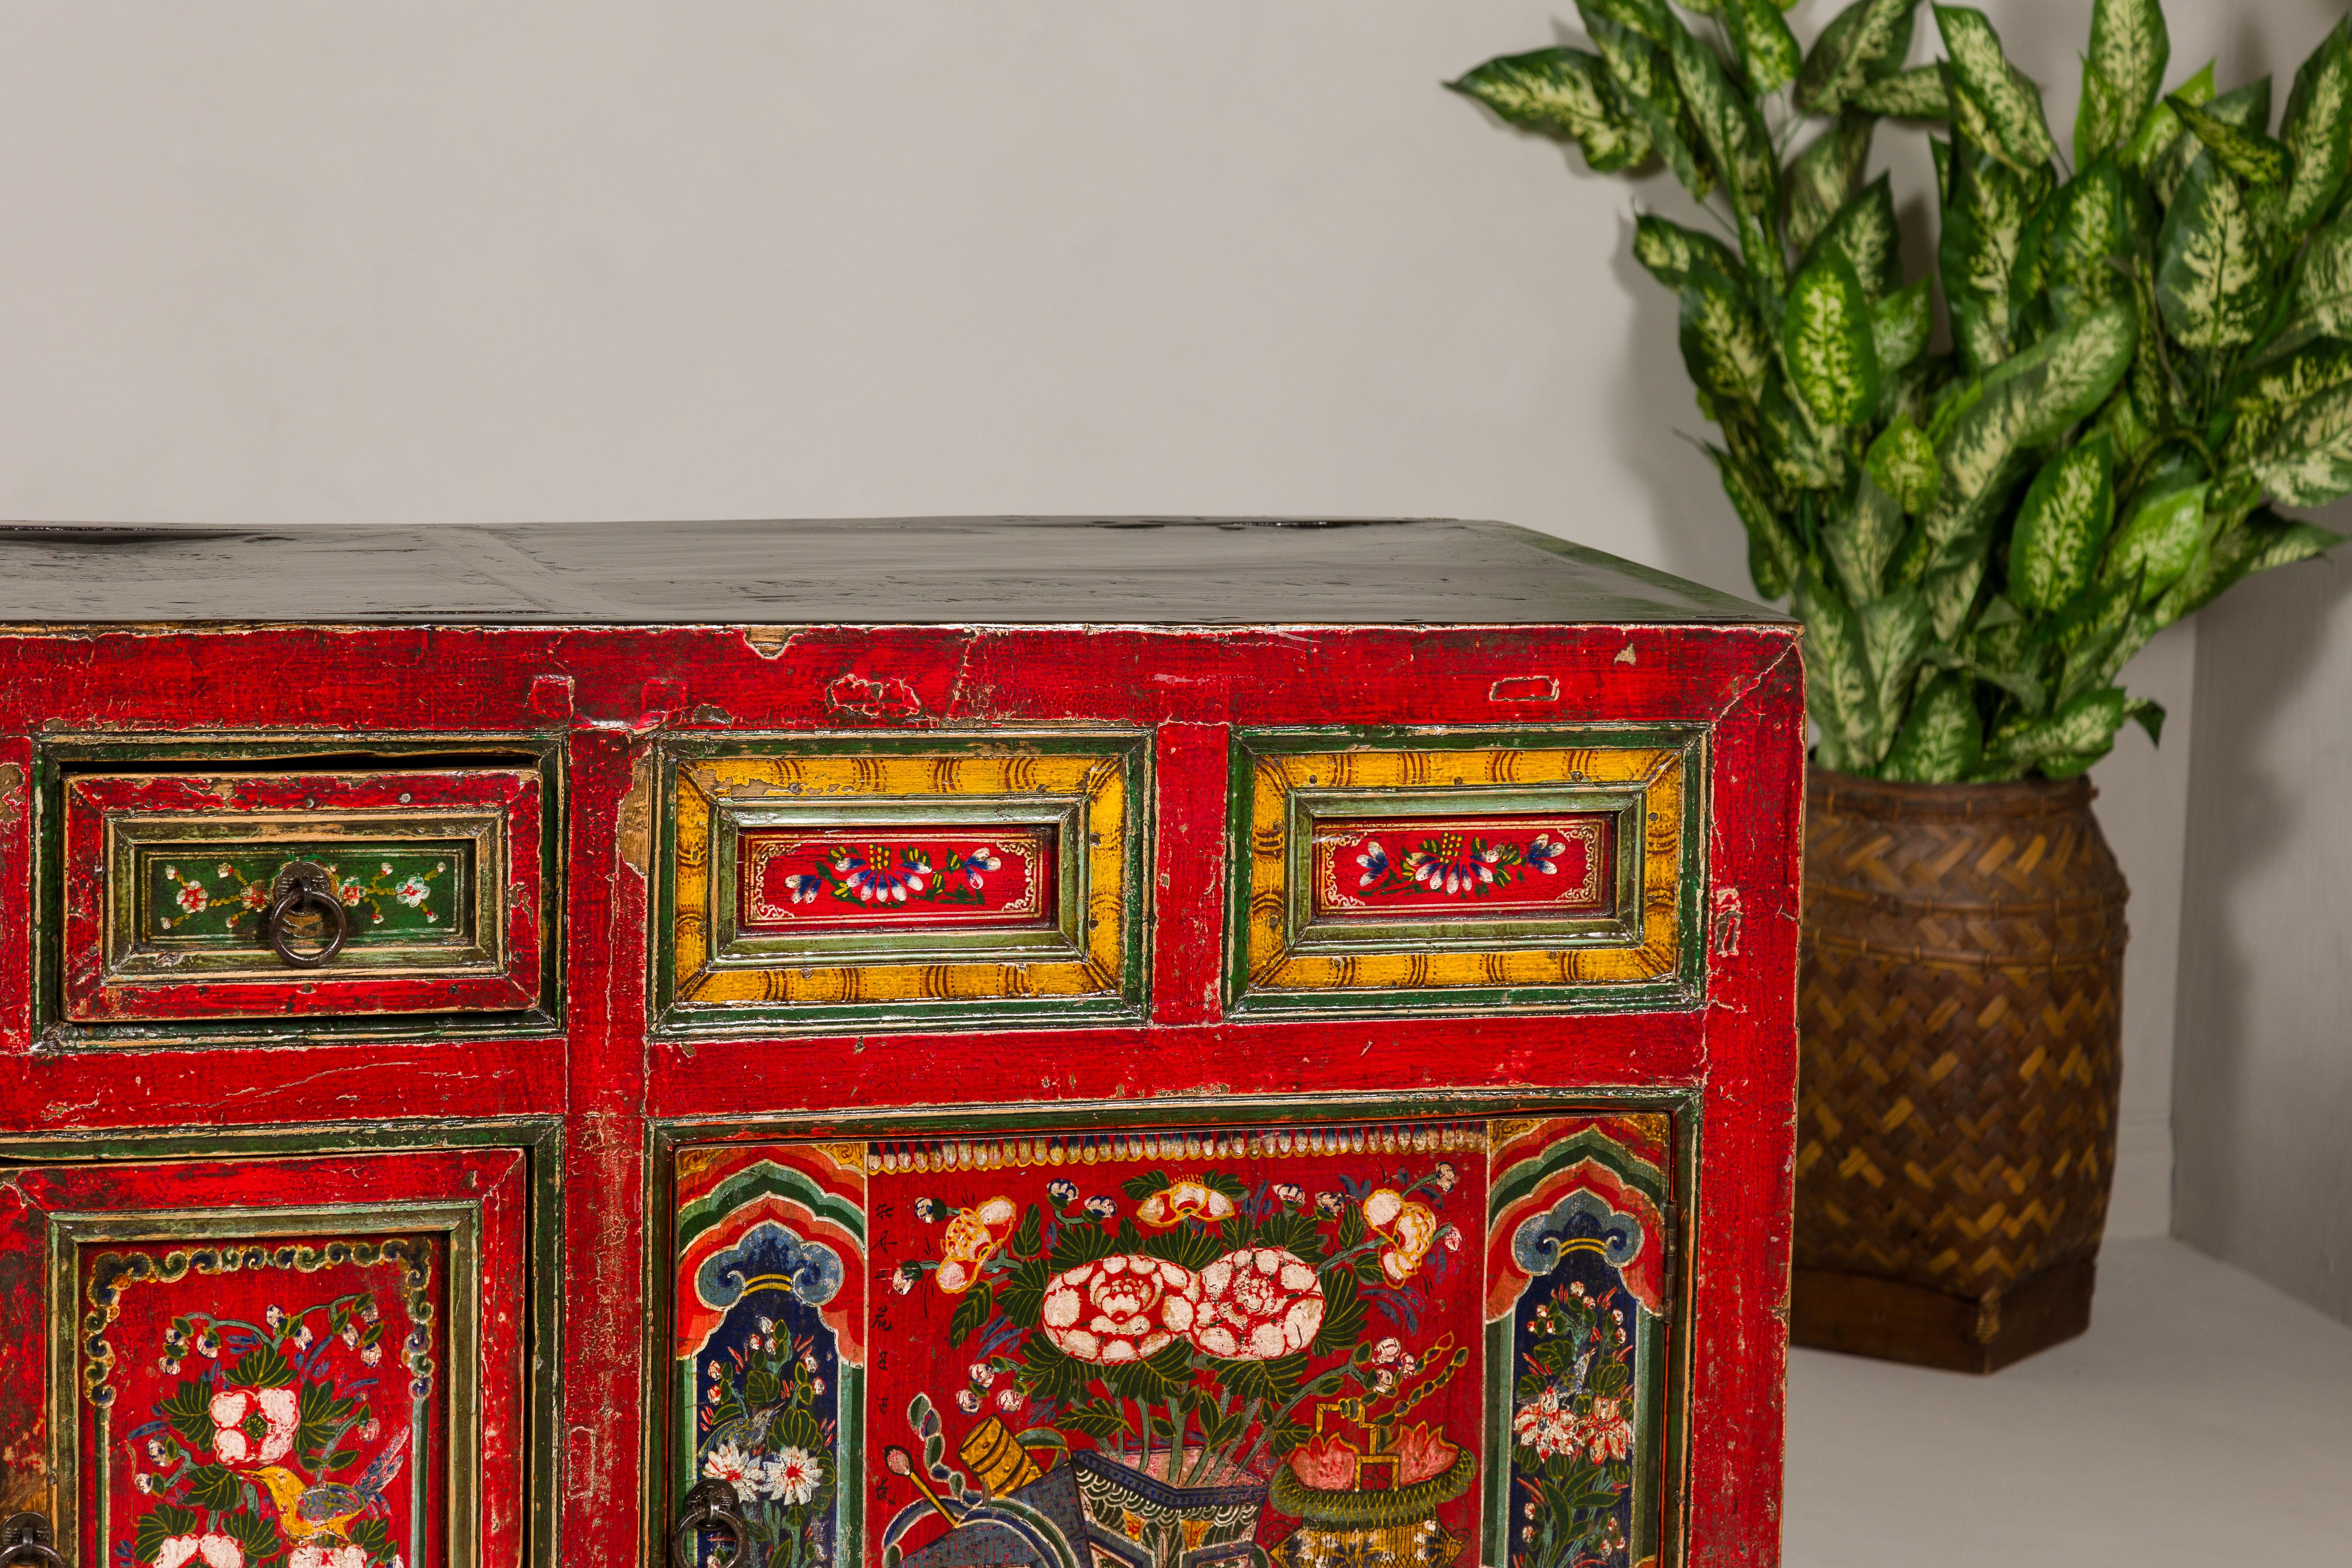 Wood 19th Century Mongolian Polychrome Sideboard with Doors, Drawers and Floral Décor